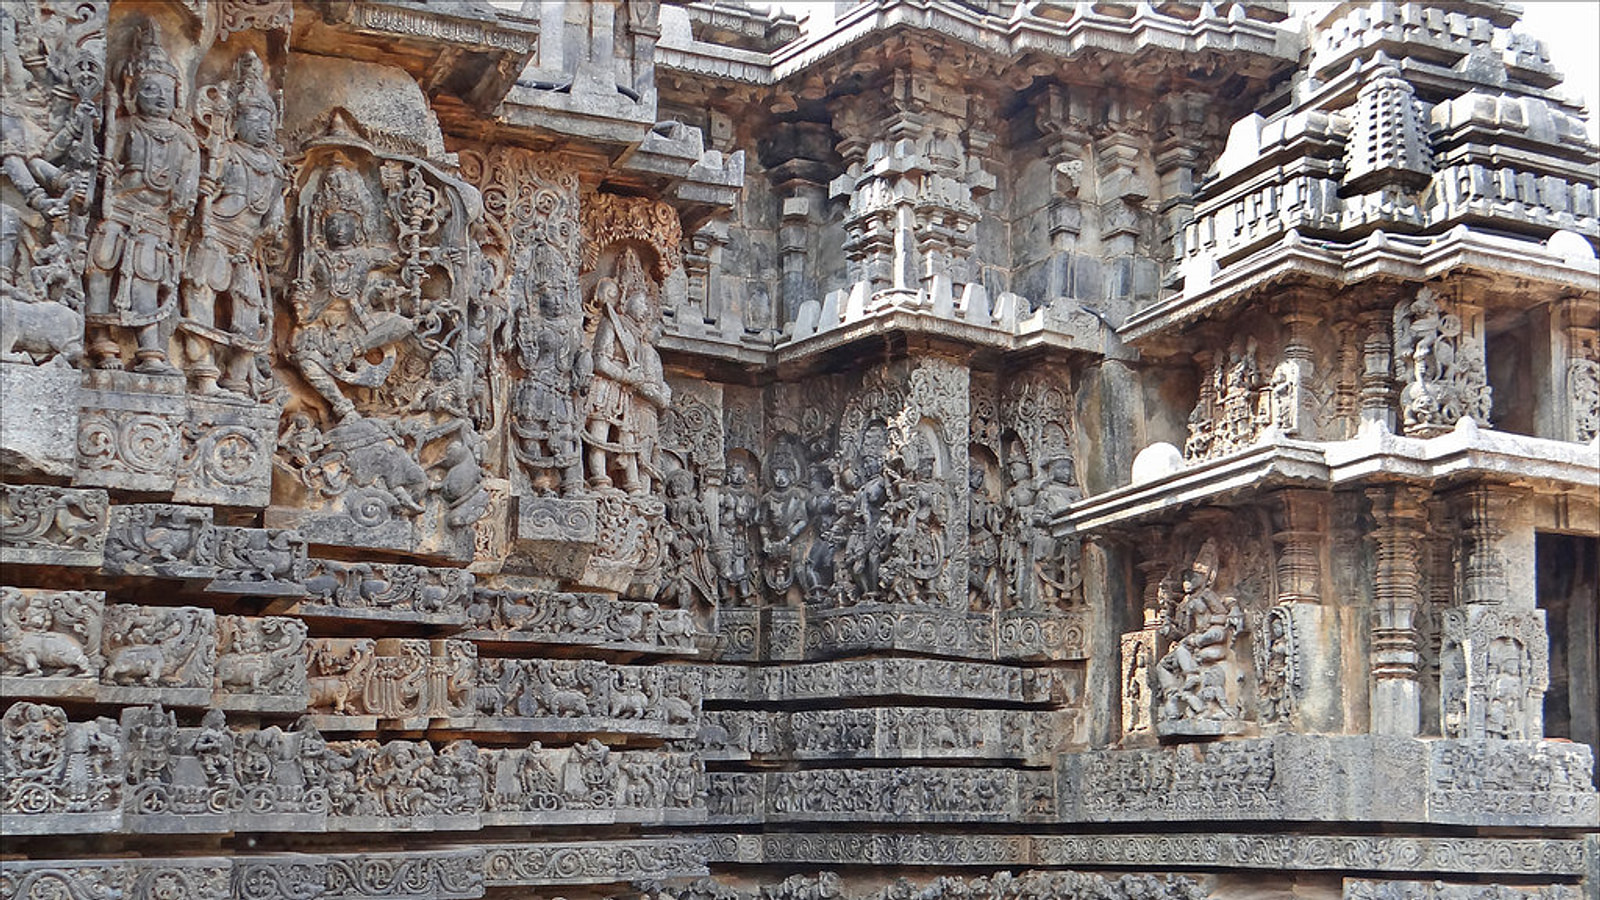 The Chennakeshava Temple In Belur Is Highlight Of The Grand Hoysala  Architecture Temple Built In 1117 Ad By The Hoysalas Vintage Image Stock  Photo - Download Image Now - iStock